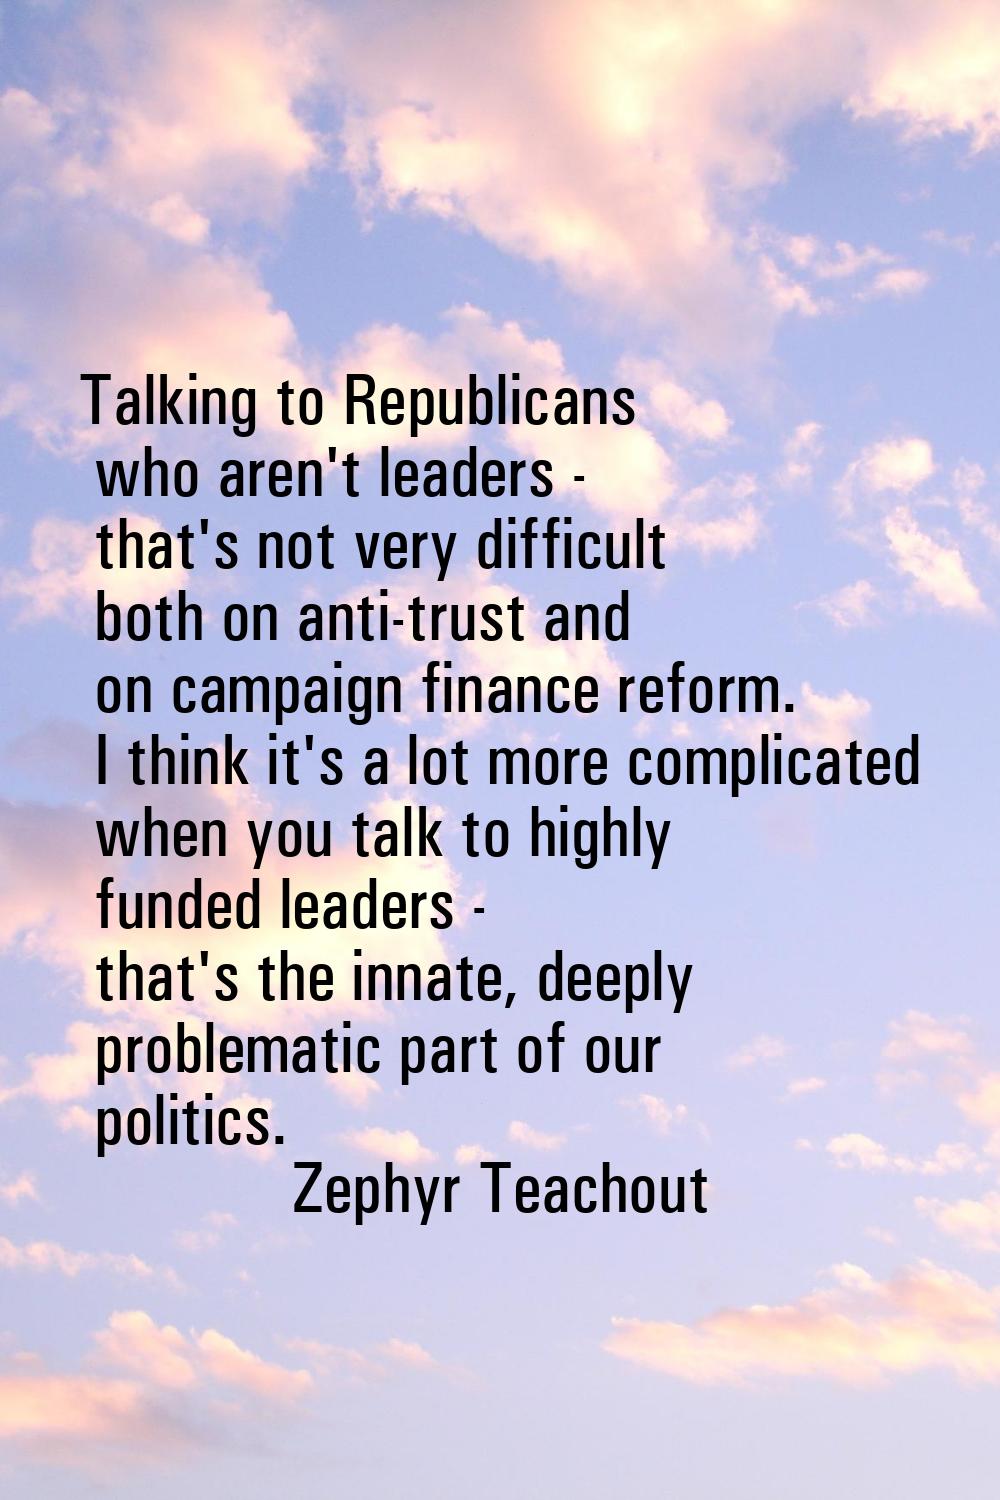 Talking to Republicans who aren't leaders - that's not very difficult both on anti-trust and on cam